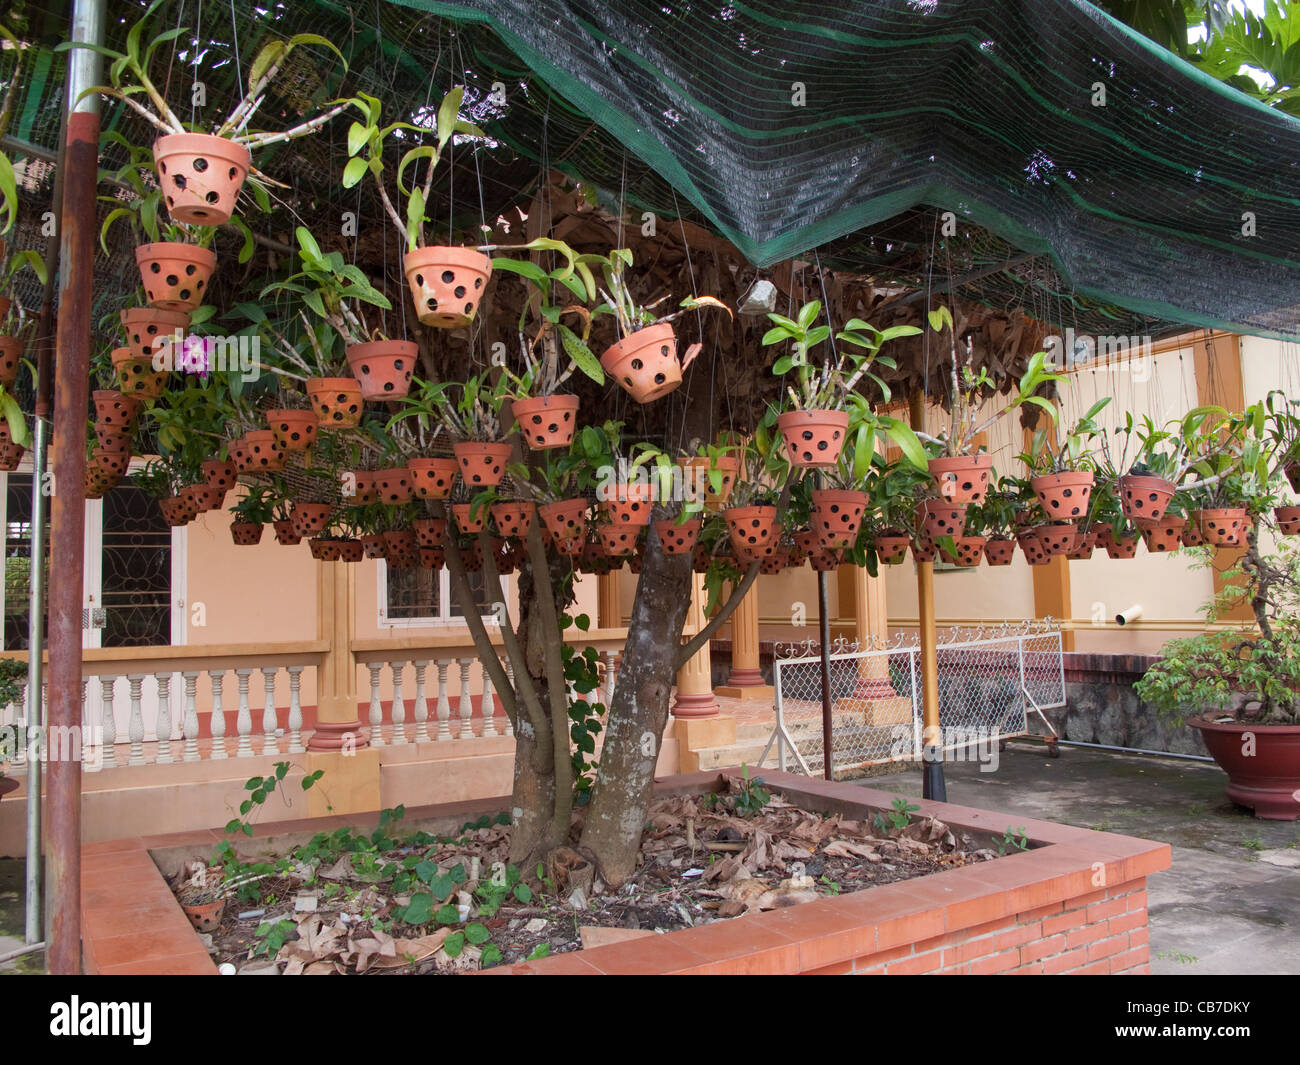 Pots with orchids under cultivation slung under a tree at a Buddhist temple in Hue, Vietnam Stock Photo